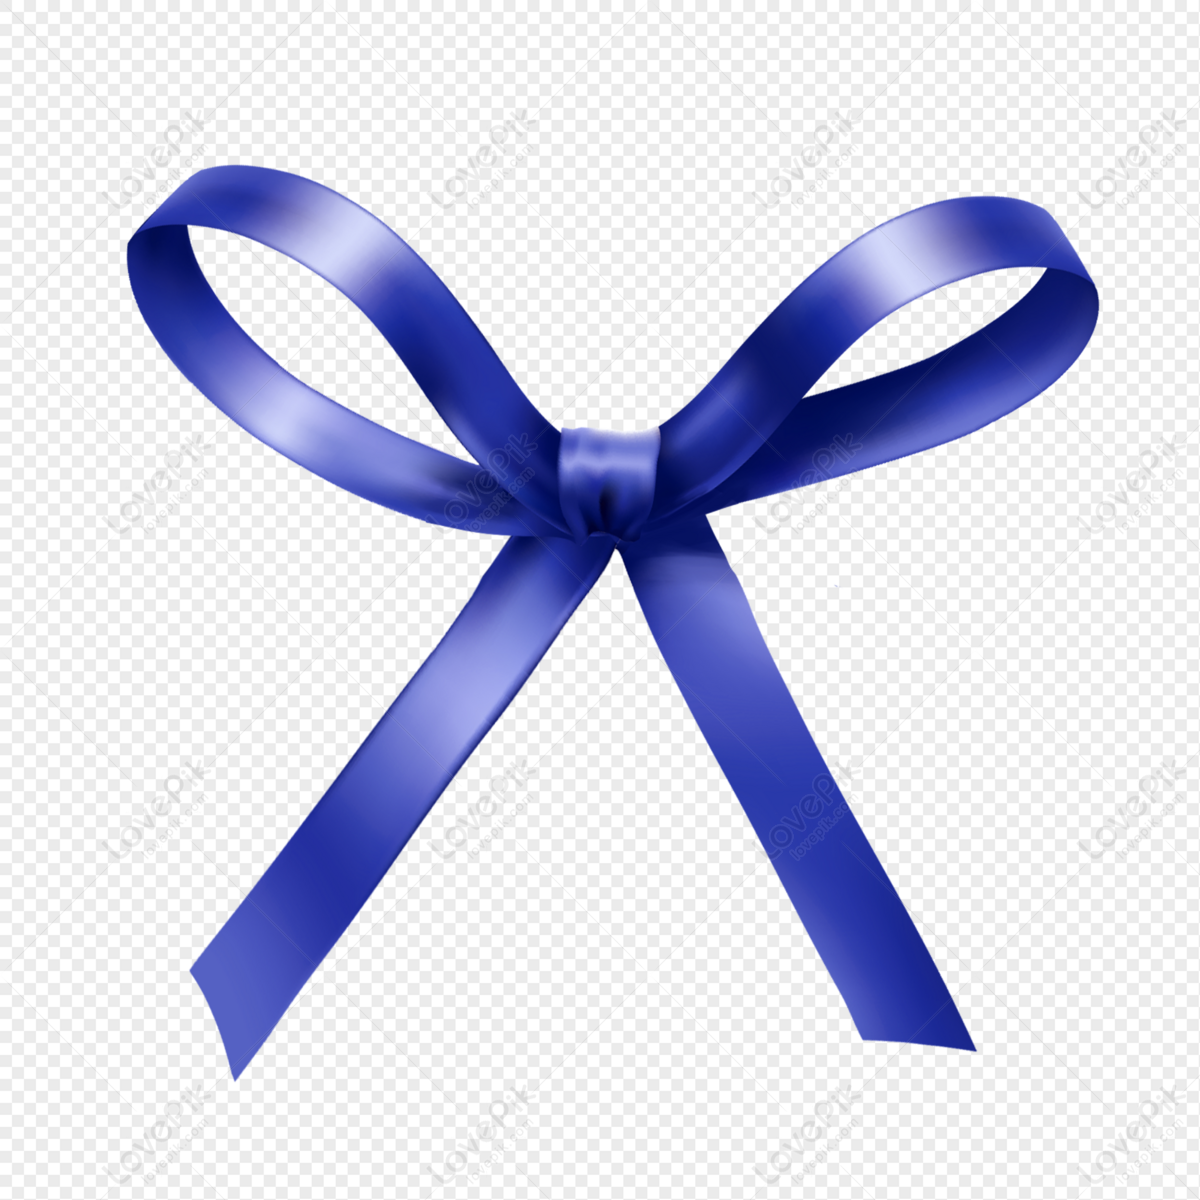 Blue Ribbon Banner Clipart Hd PNG, Wavy Flying Blue Azul Blank Transparent  Ribbon Banner Vector Png Clipart, Wavy, Ribbon, Banner PNG Image For Free  Download